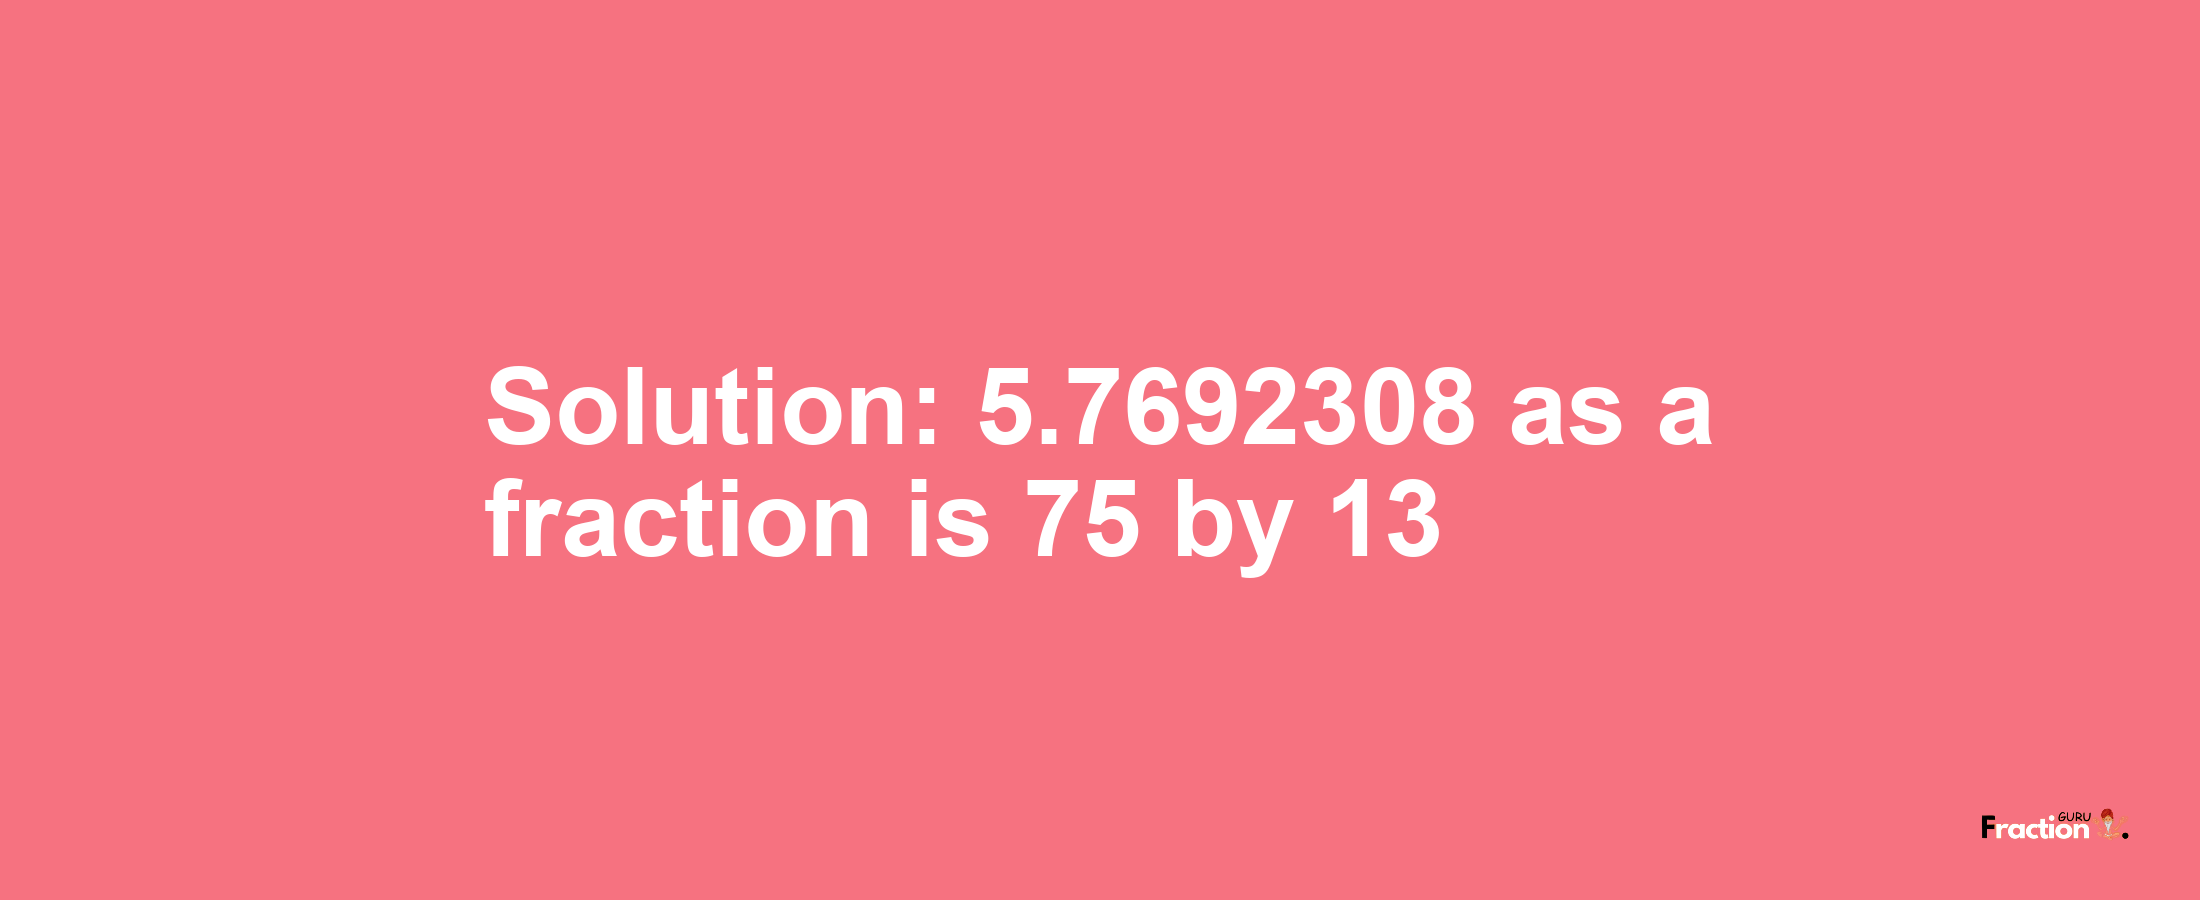 Solution:5.7692308 as a fraction is 75/13